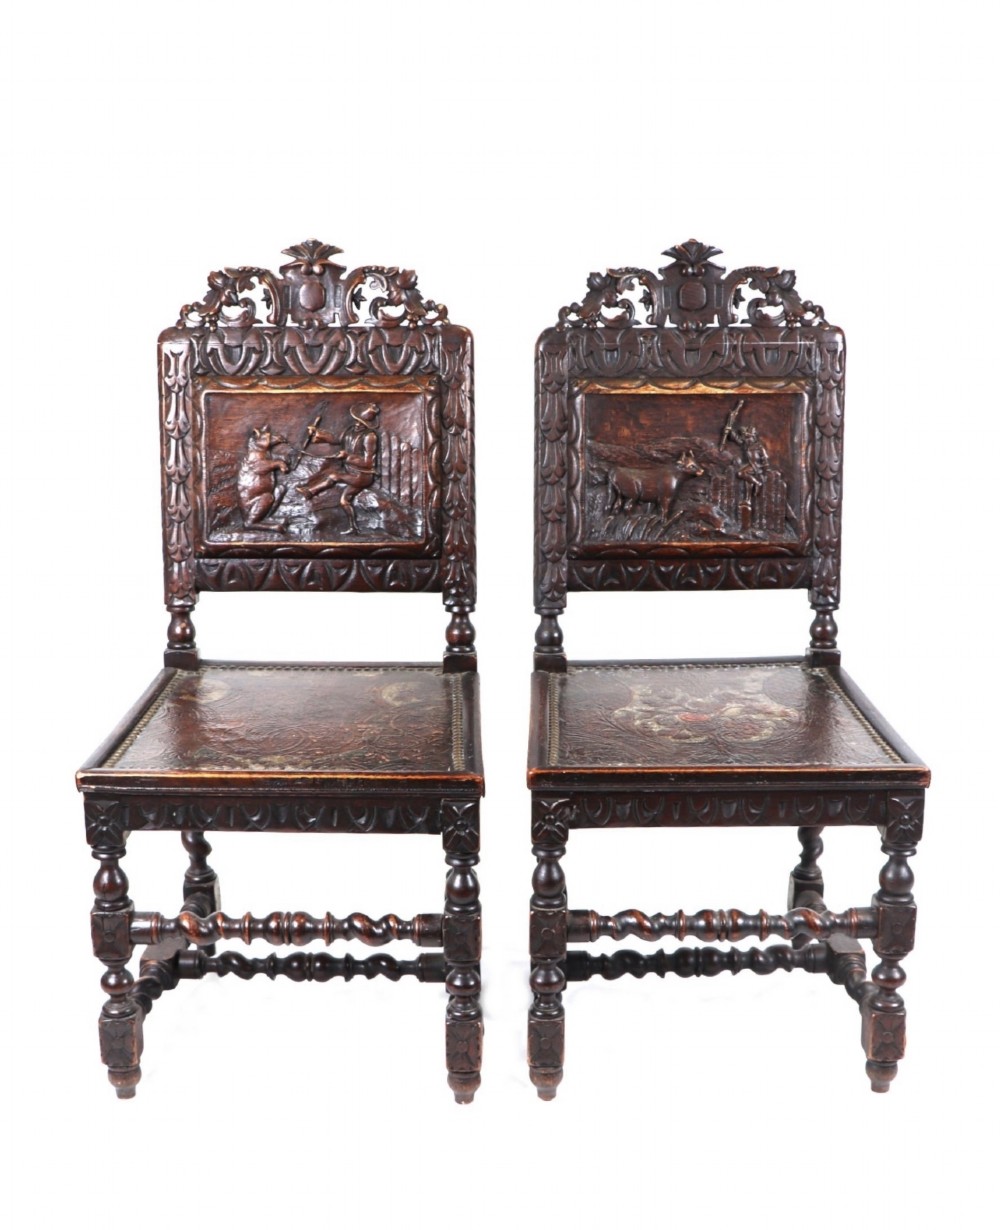 pair of black forest manner chairs with carved back showing a dancing bear